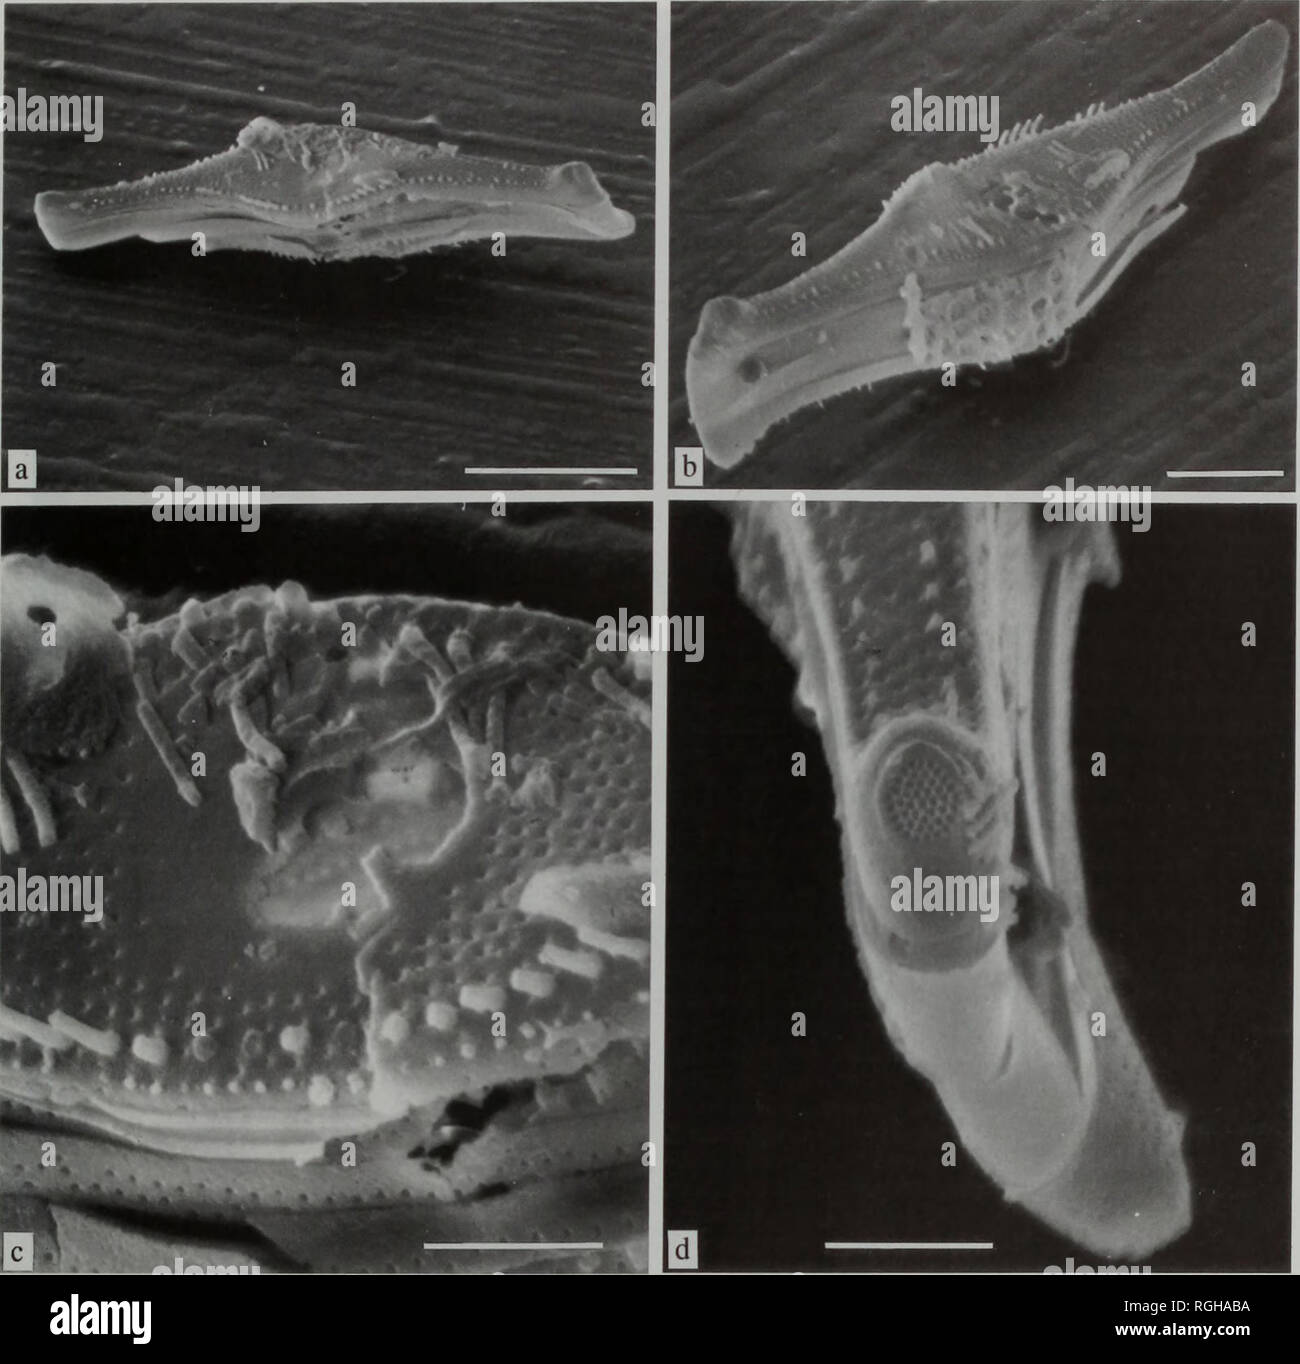 . Bulletin of the British Museum (Natural History), Botany. REVISION OF RUTILARIA GREVILLE (BACILLARIOPHYTA) 79. Plate X Rutilaria hyalina, Inza, Ulyanovsk oblast, Russia, (a): oblique valve view of frustule (SEM 113308); (b): oblique valve view of another frustule (SEM 113312); (c): detail of (a), centre of valve with inner row of cylindrical marginal spines and outer row of minute marginal spines (SEM 113309); (d): same specimen as (b), apex with elevation and ocellus with porelli (SEM 113311). (a), bar = 10 ^.m; (b), bar = 5 (xm; (c), (d), bar = 2 x.m. Plate IX Rutilaria delicatula, Inza,  Stock Photo